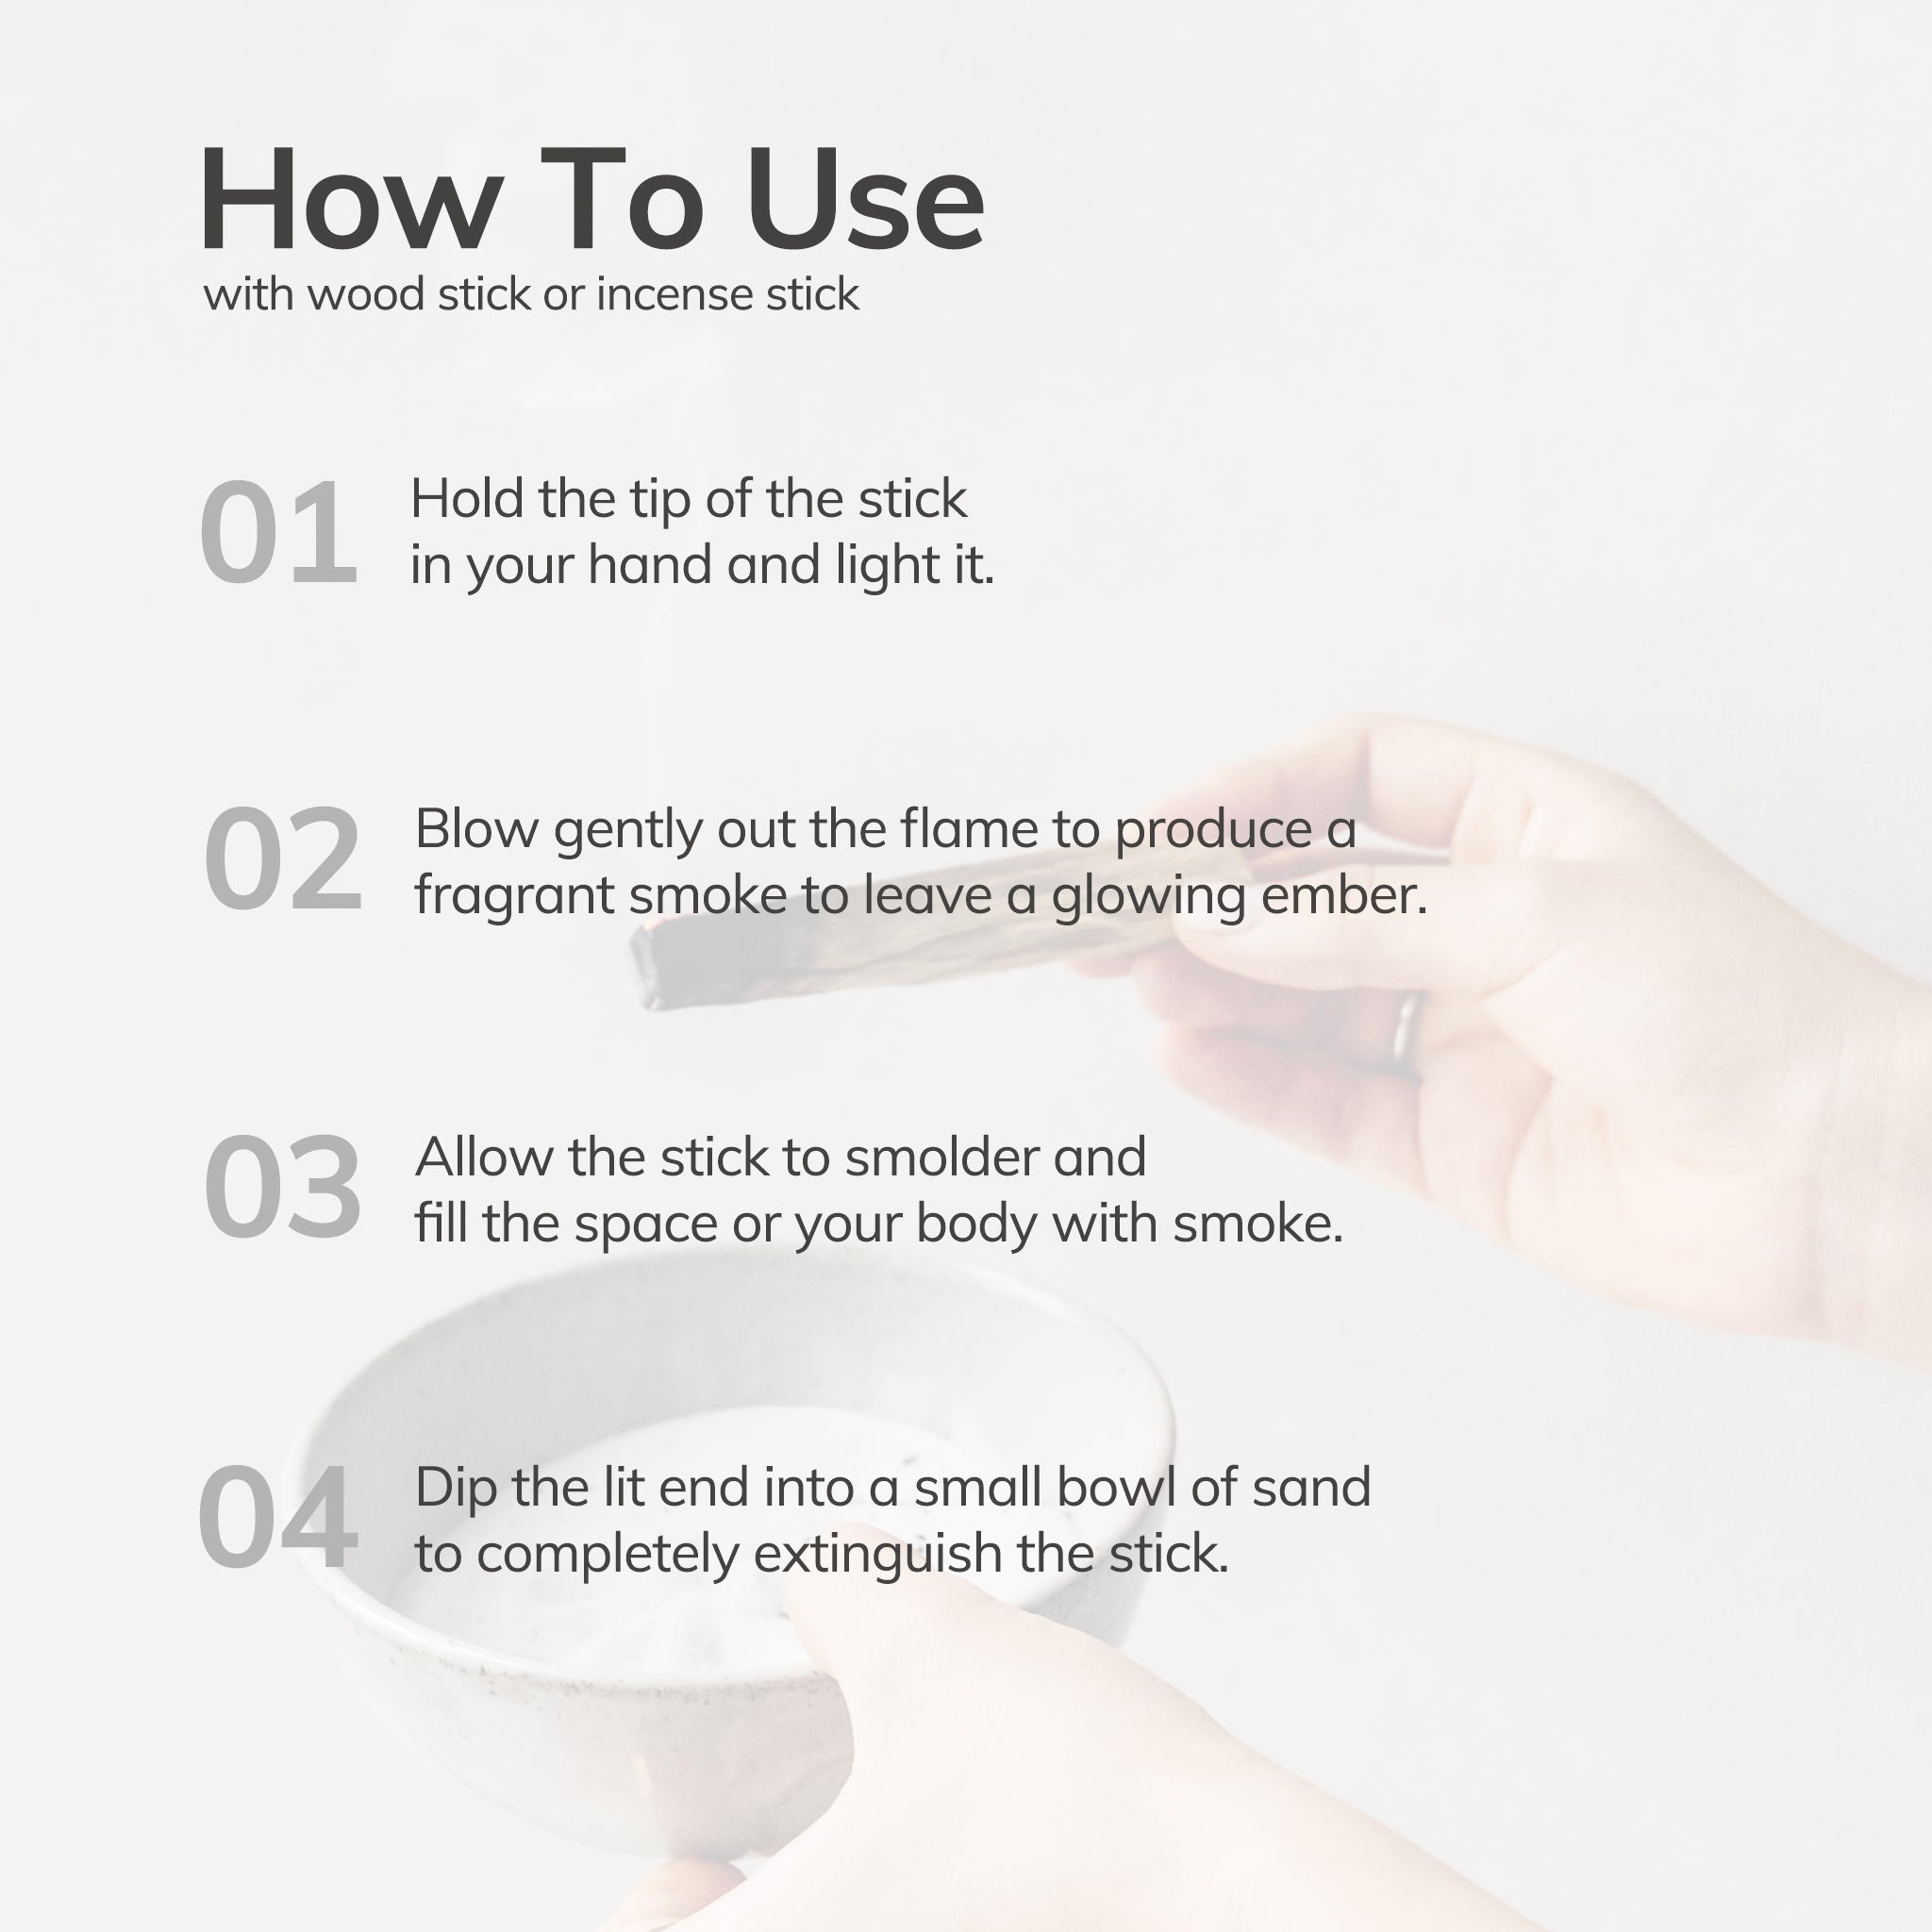 Chronological list of how to use with mini cinnamon incense stick.